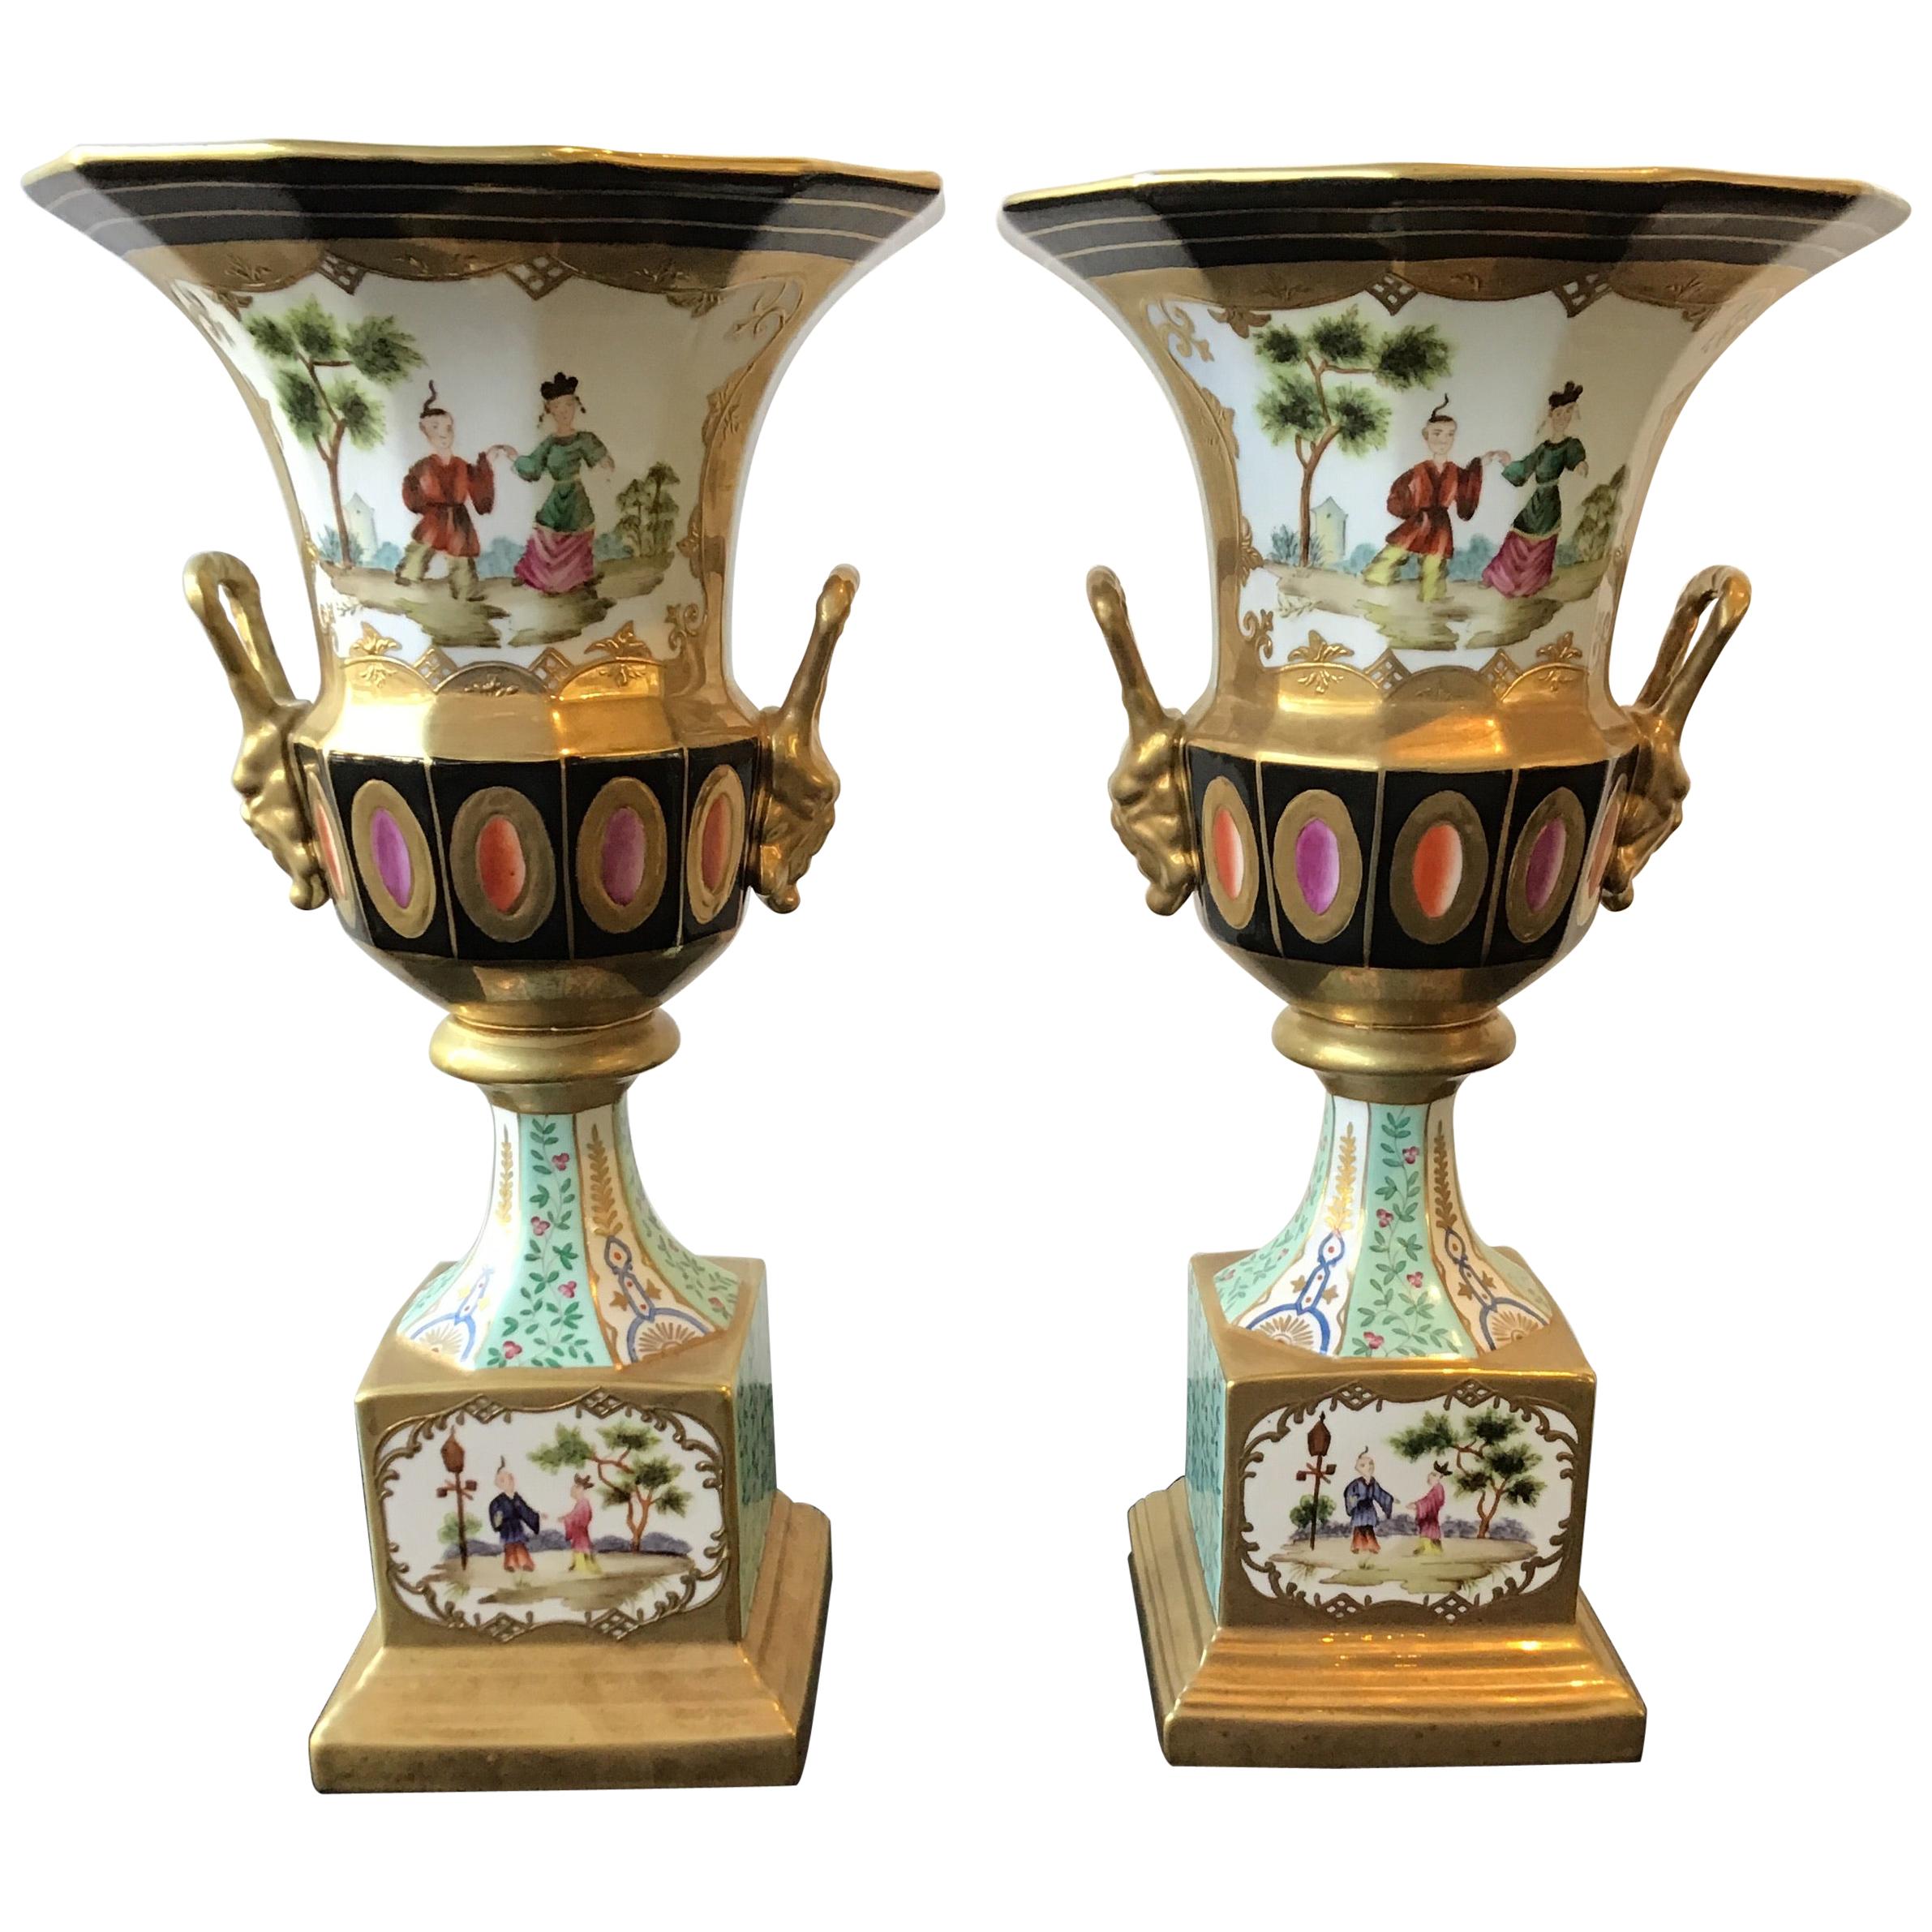 Pair of Porcelain Chinoiserie Urns by Chelsea House